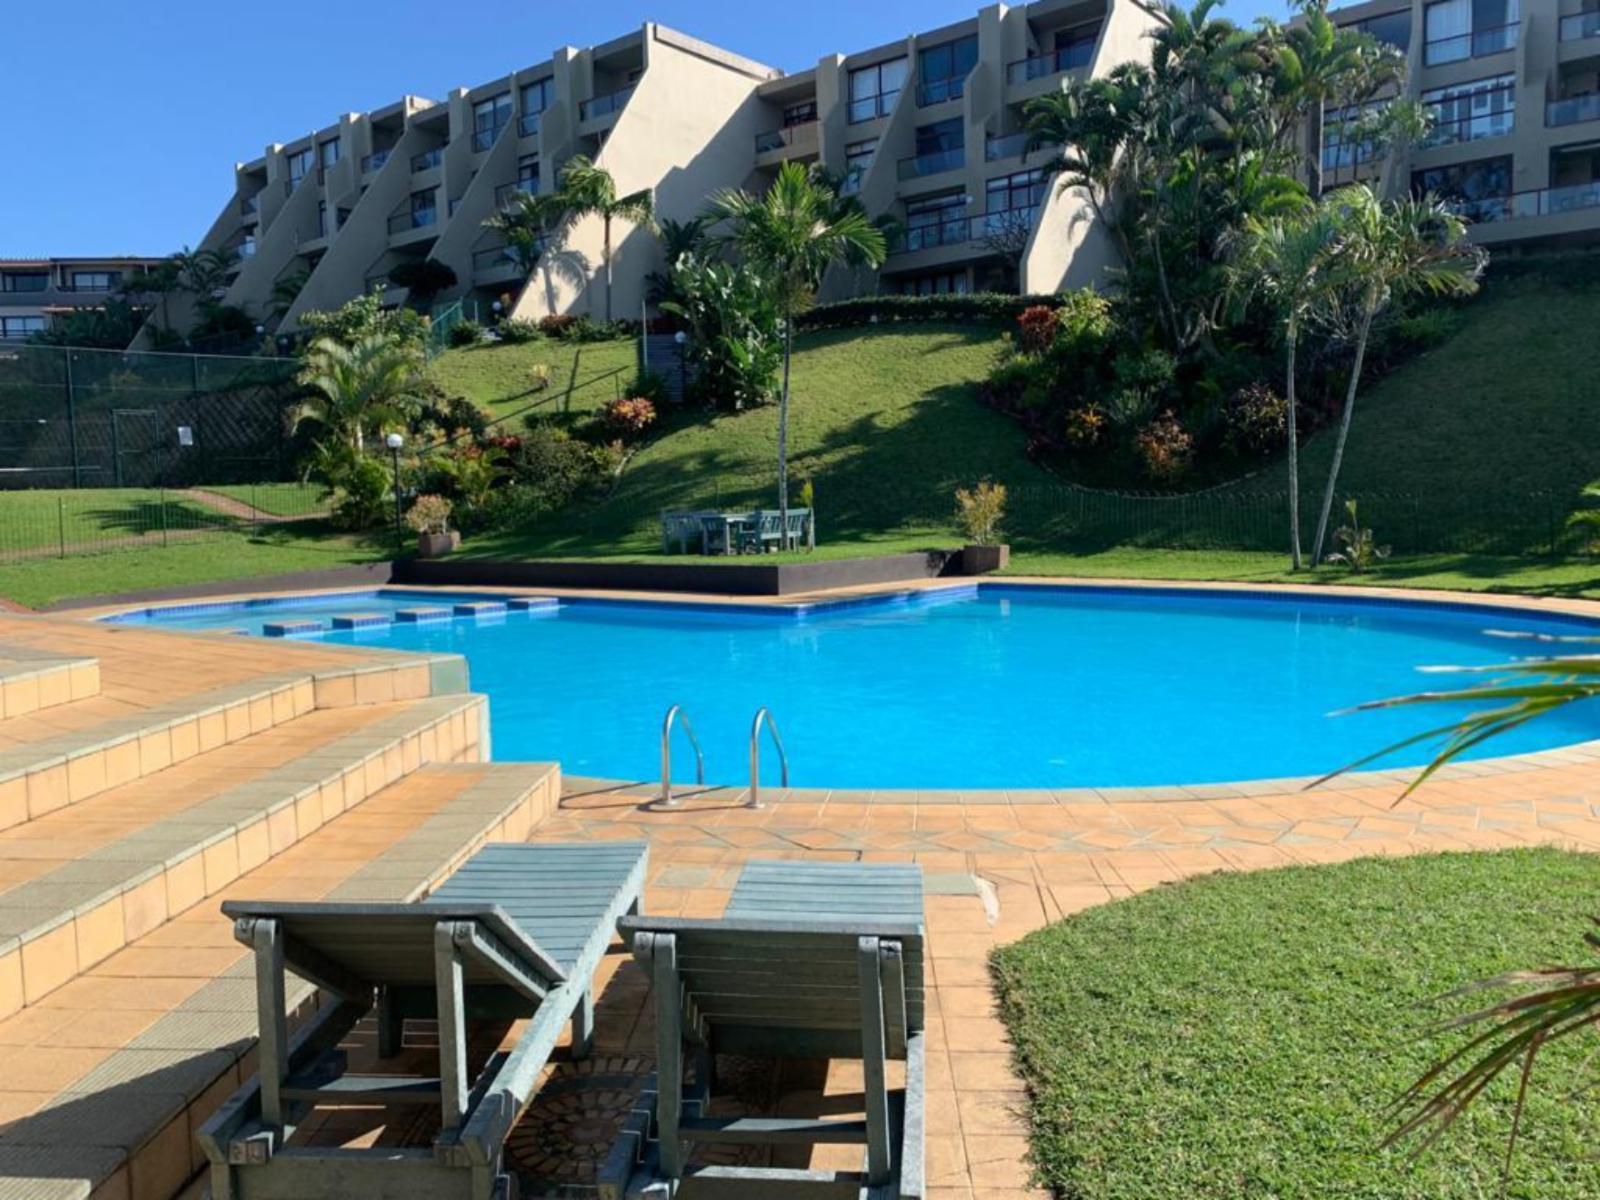 Escape To An Oceanview Vacation Home In Umdloti Beach Umdloti Beach Durban Kwazulu Natal South Africa Complementary Colors, Beach, Nature, Sand, Palm Tree, Plant, Wood, Swimming Pool